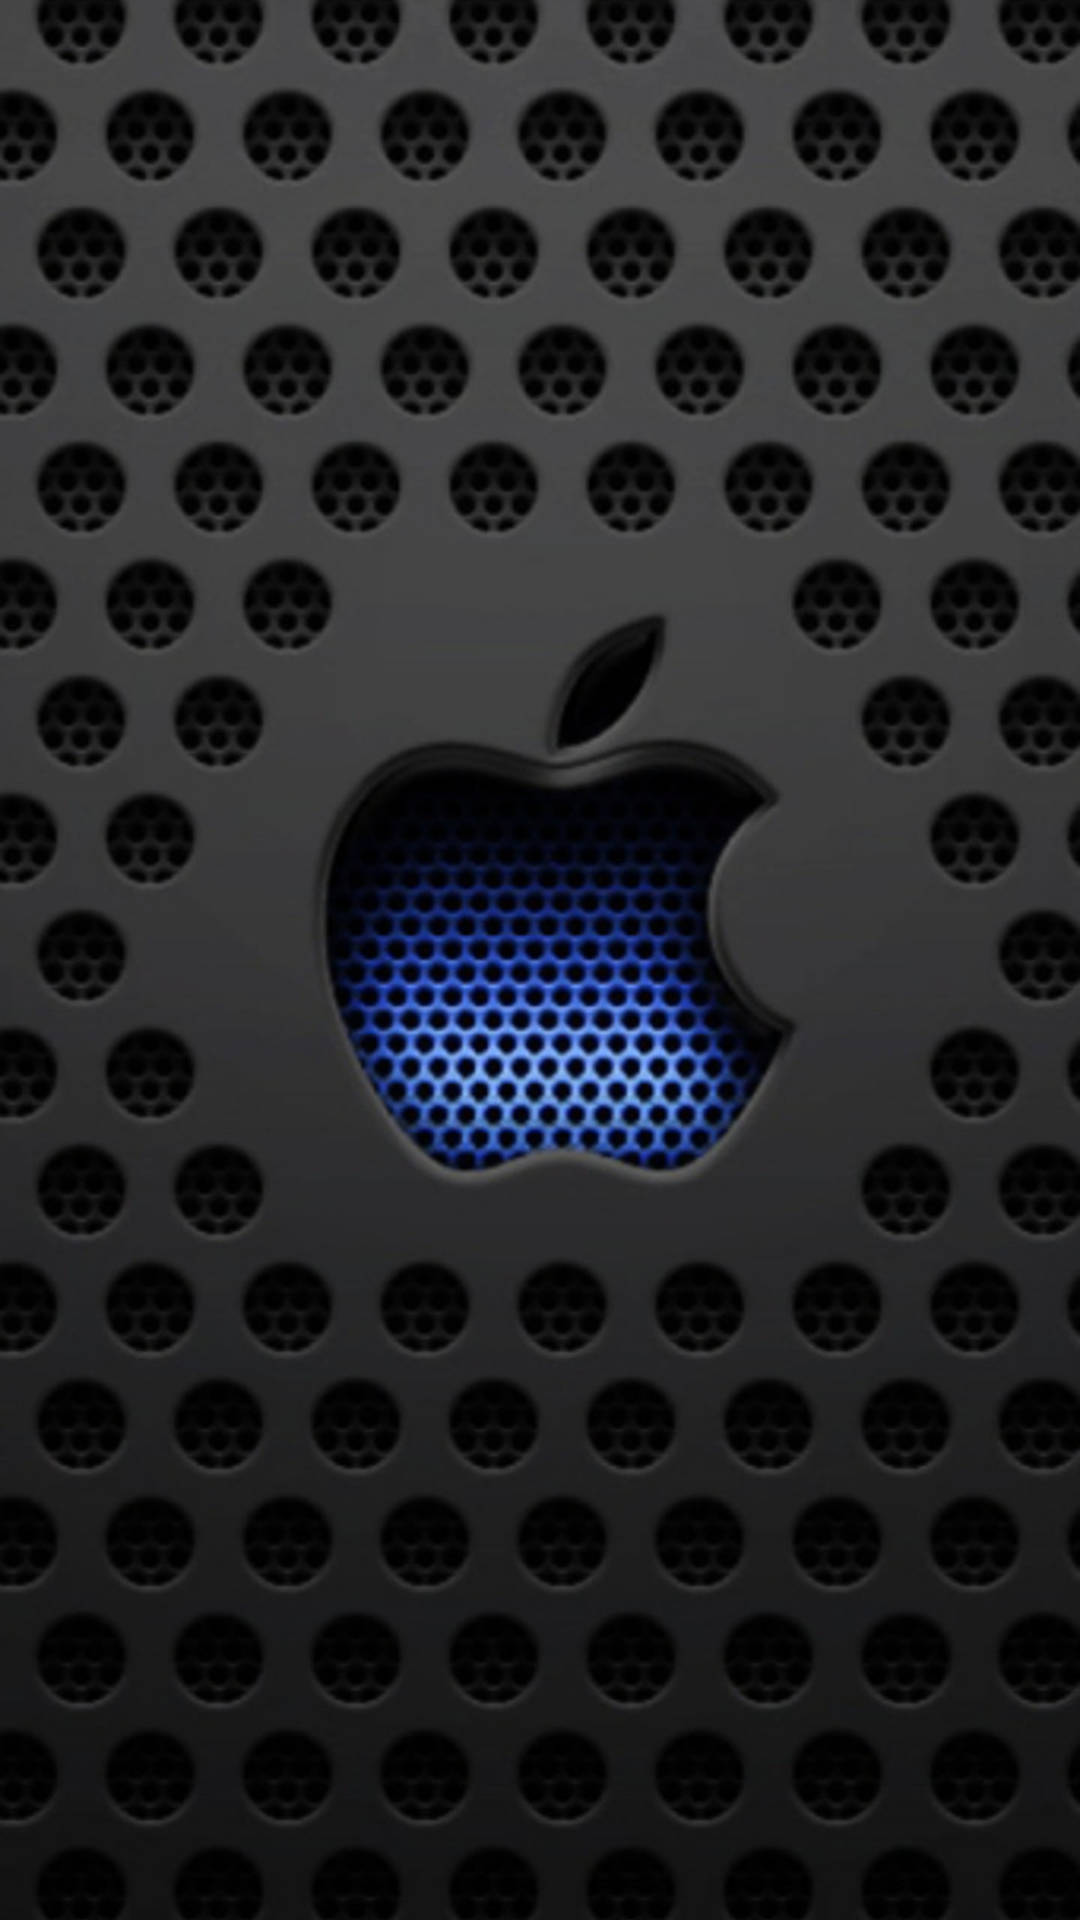 Full Hd Apple On Perforated Black Background